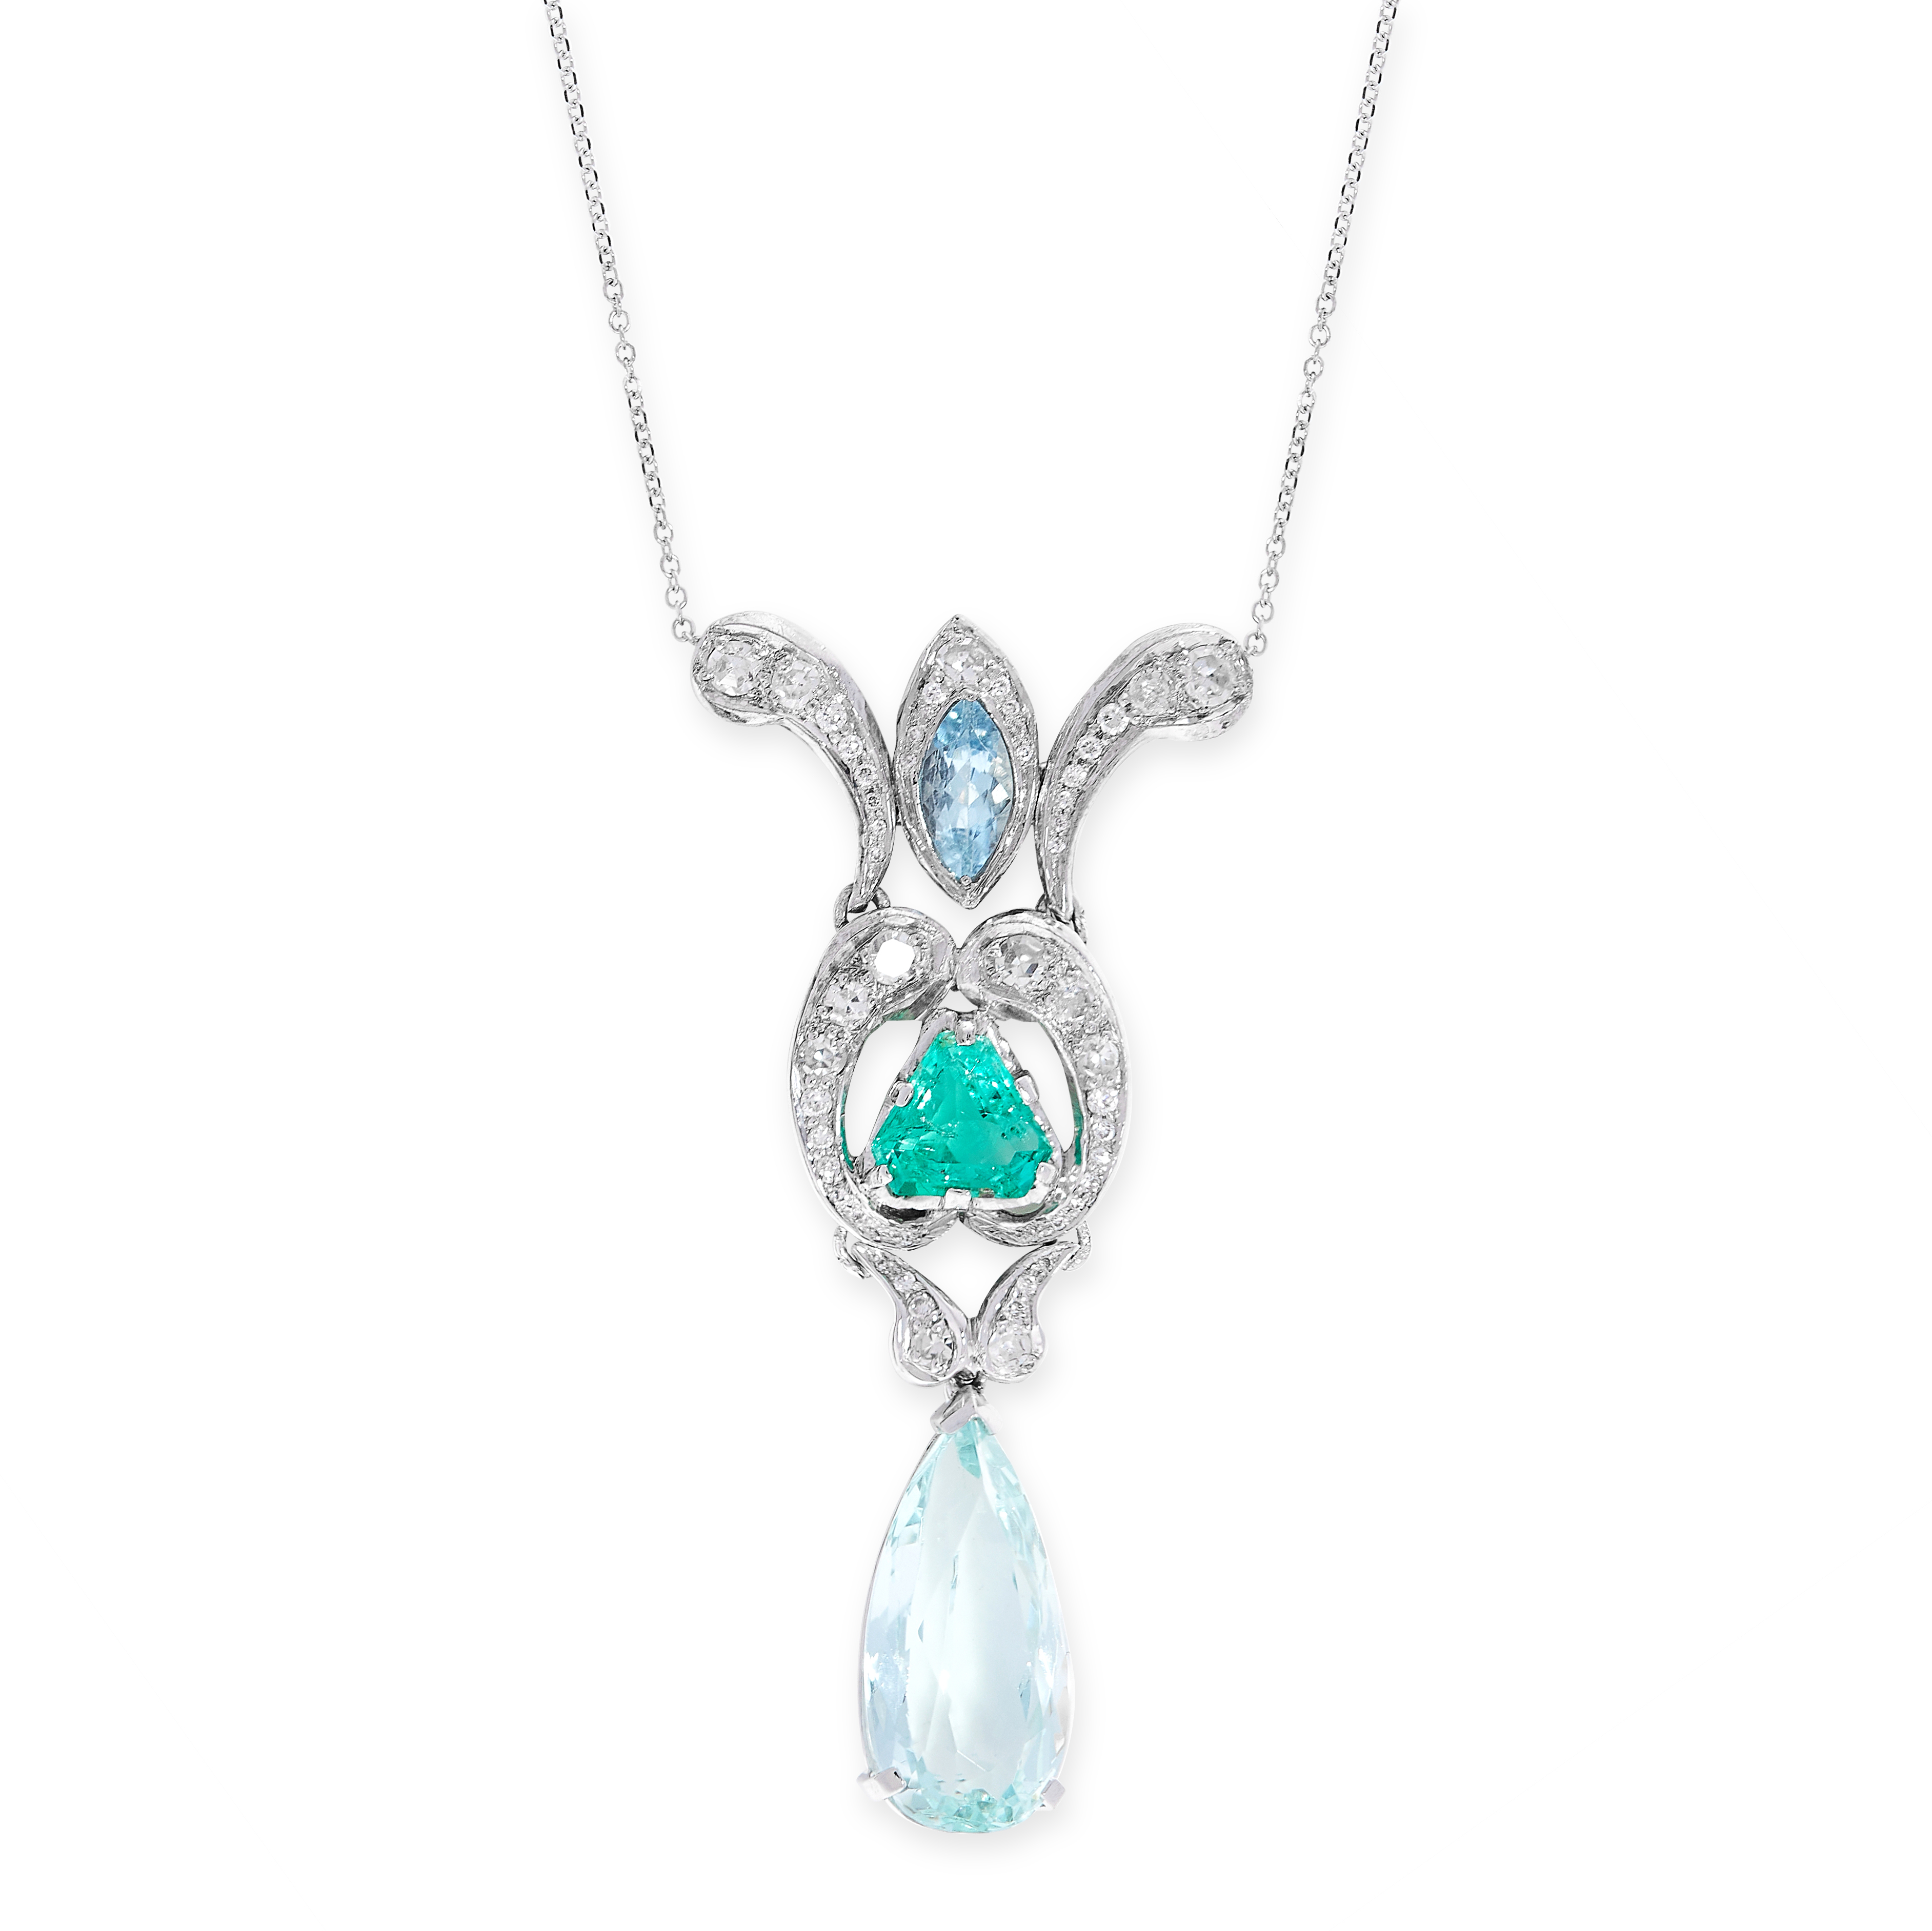 AQUAMARINE, EMERALD AND DIAMOND PENDANT NECKLACE the pendant of scroll design, set with a marquise-